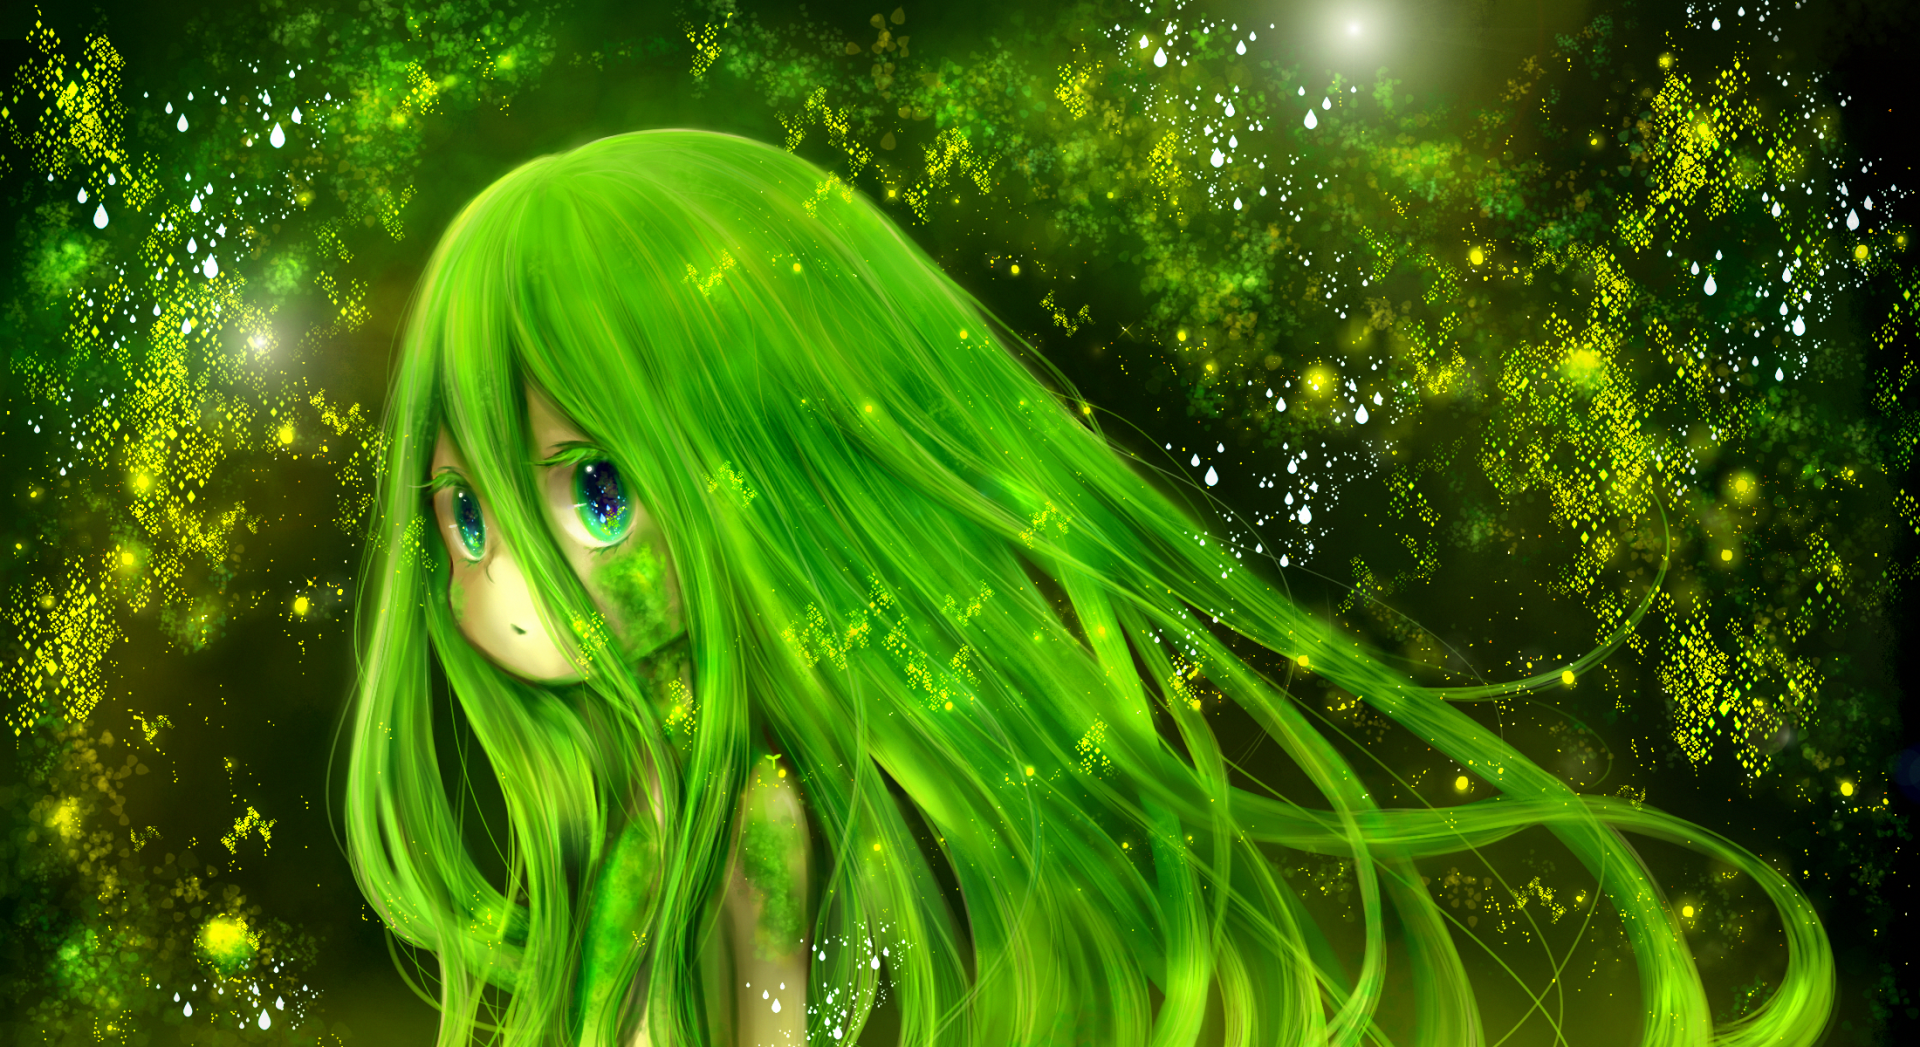 35 Best Green Hair Anime Girl (Most Beautiful) In 2022 - Gizmo Story